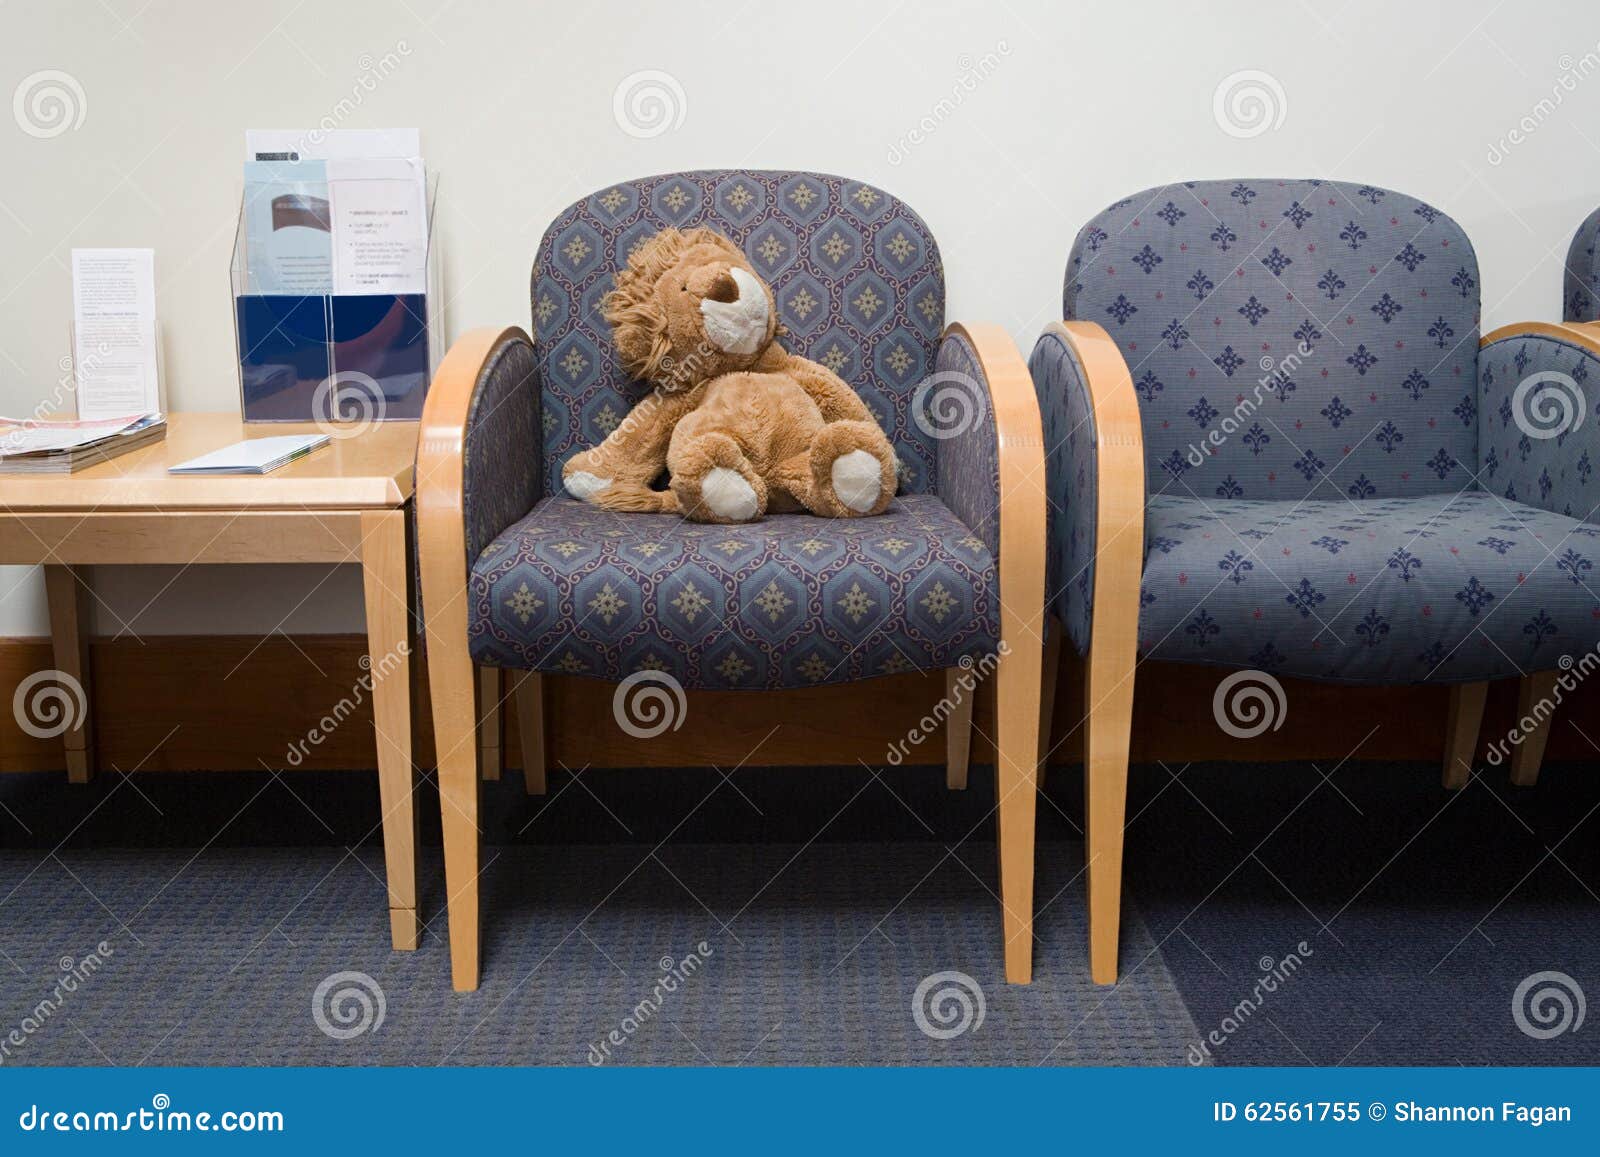 toy lion in hospital waiting room